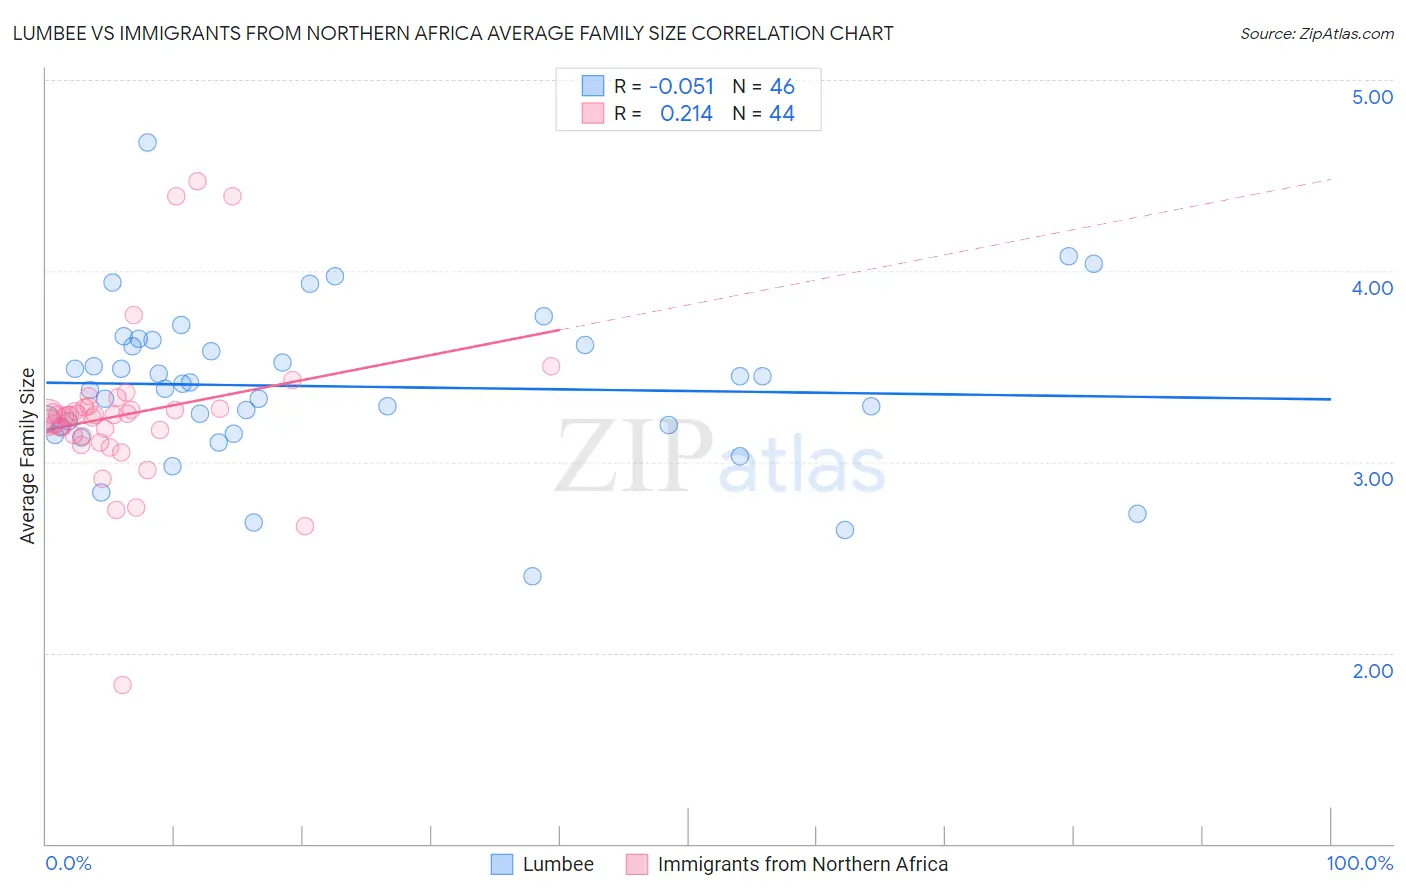 Lumbee vs Immigrants from Northern Africa Average Family Size